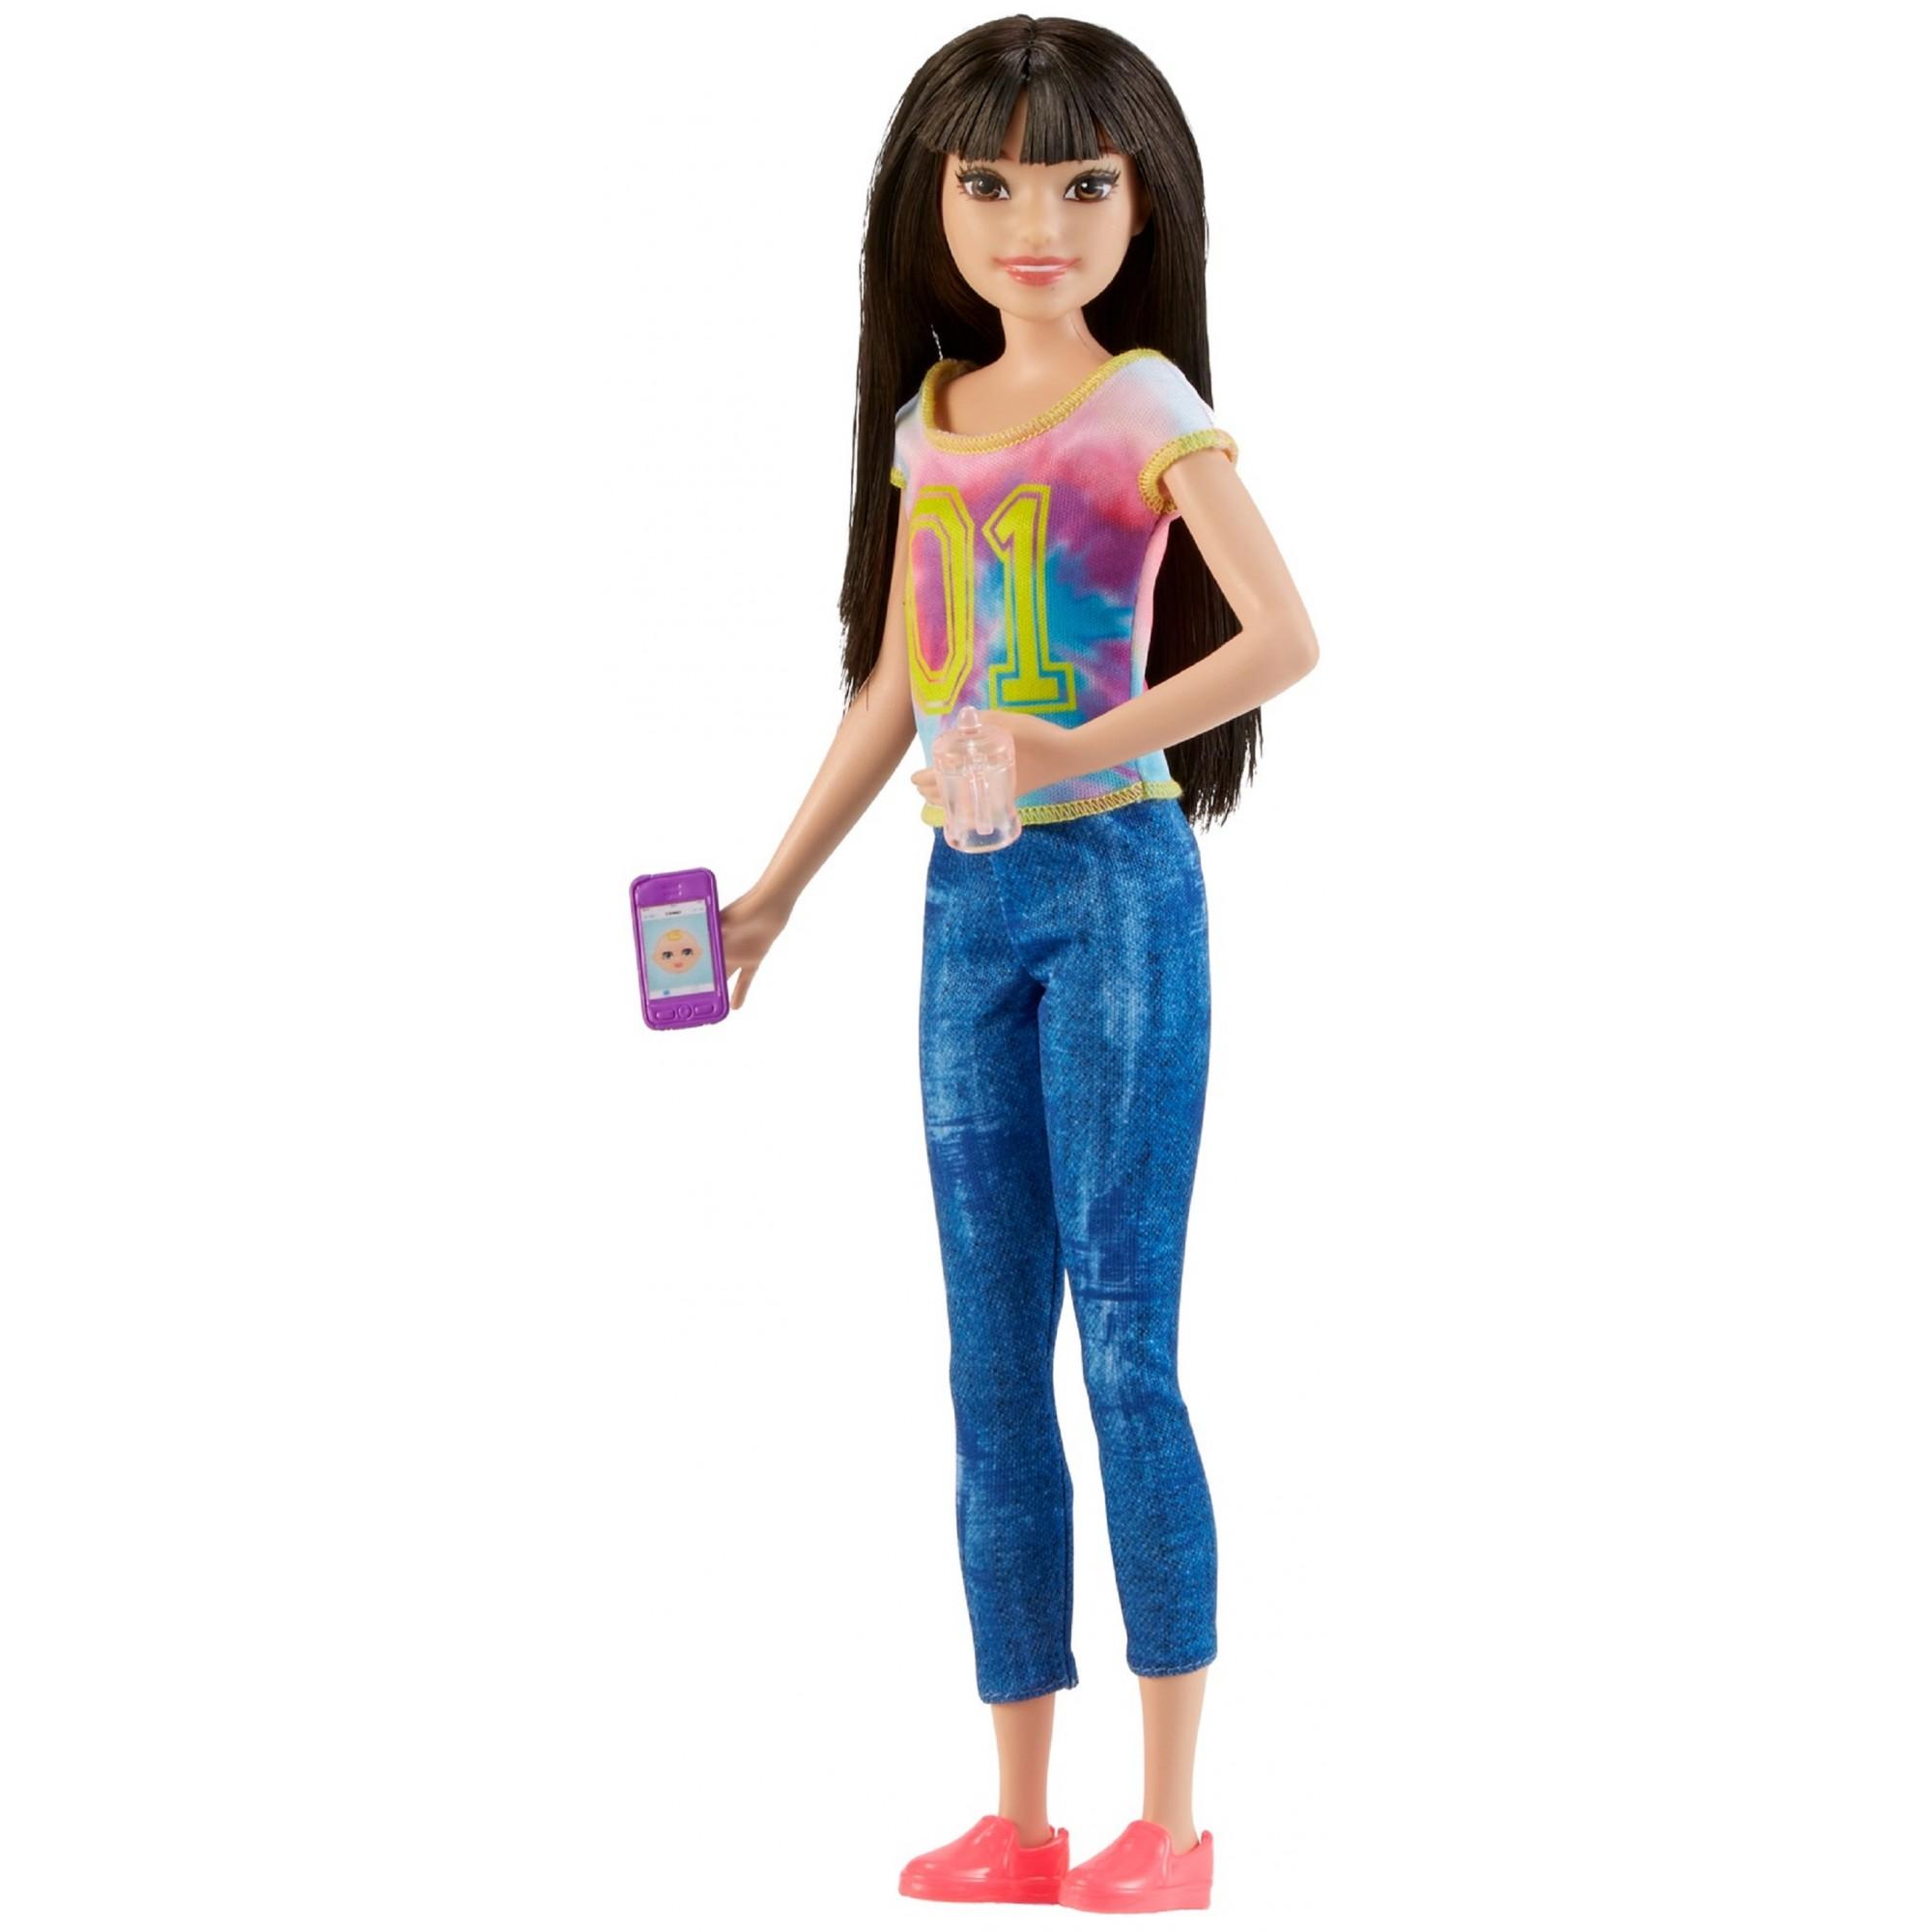 Barbie Skipper Babysitters Inc. Doll And Accessory - image 1 of 9